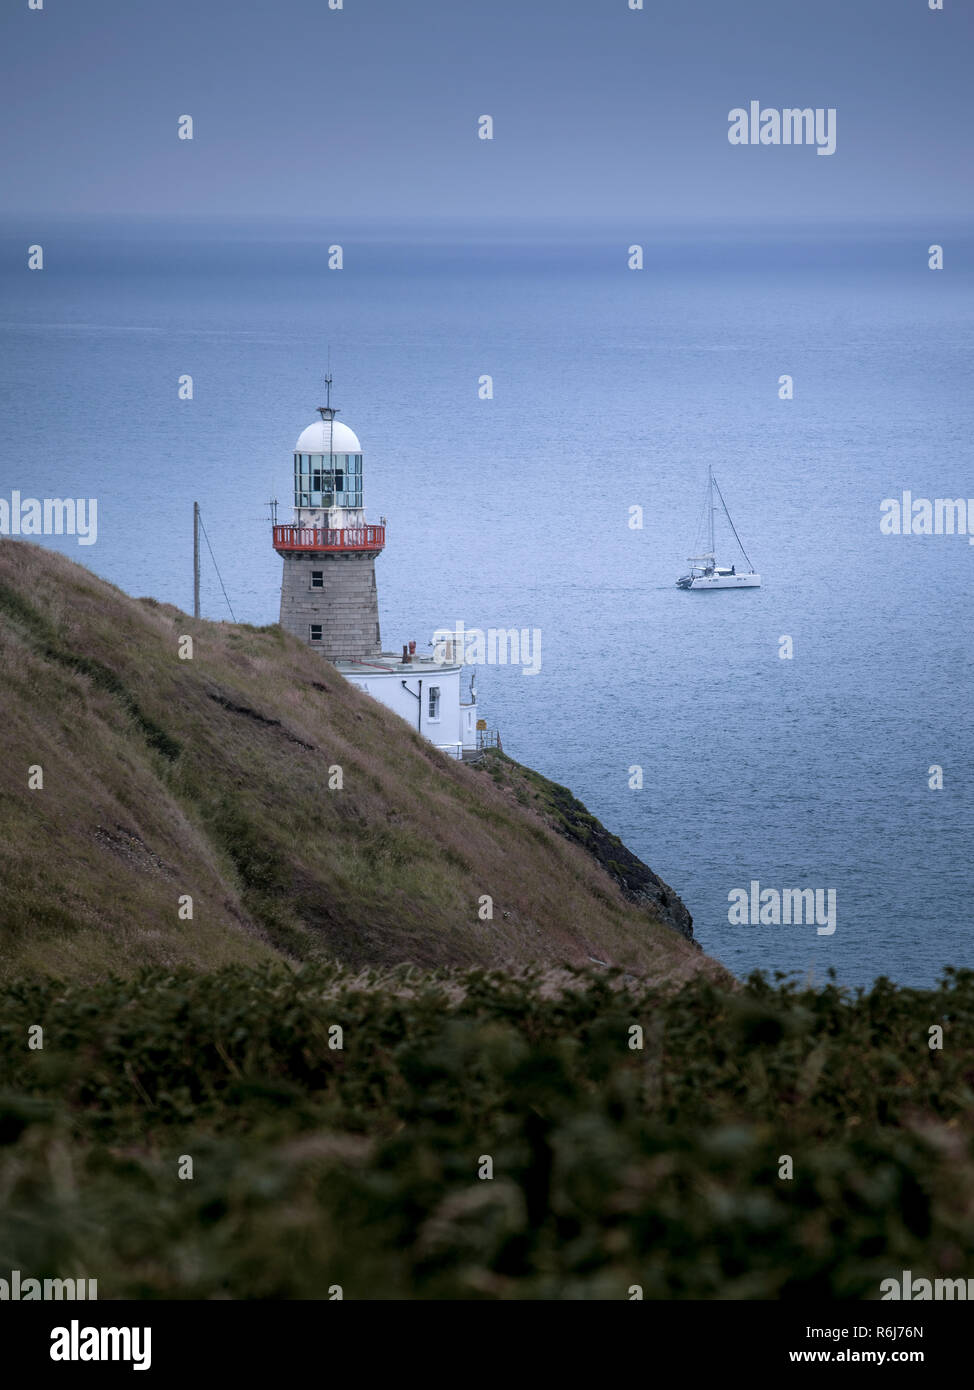 Irish lighthouse partially covered by meadows on a cloudy evening, Dublin, Ireland Stock Photo